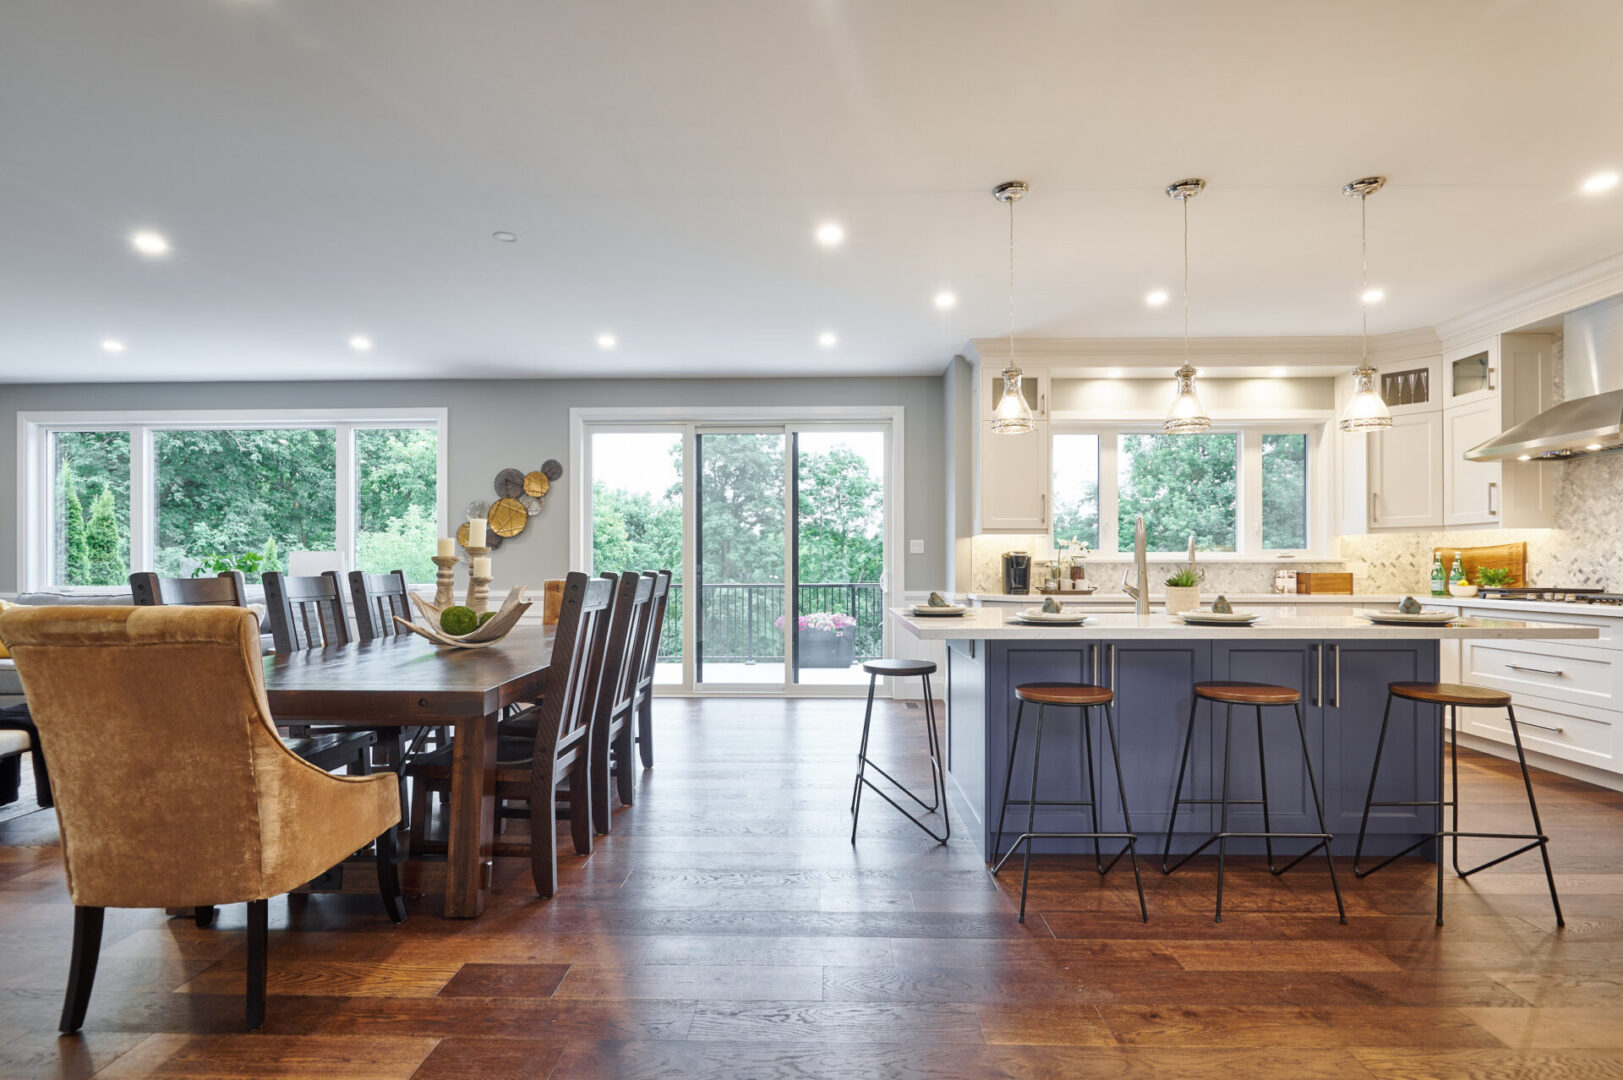 A large open kitchen with a dining table and chairs.